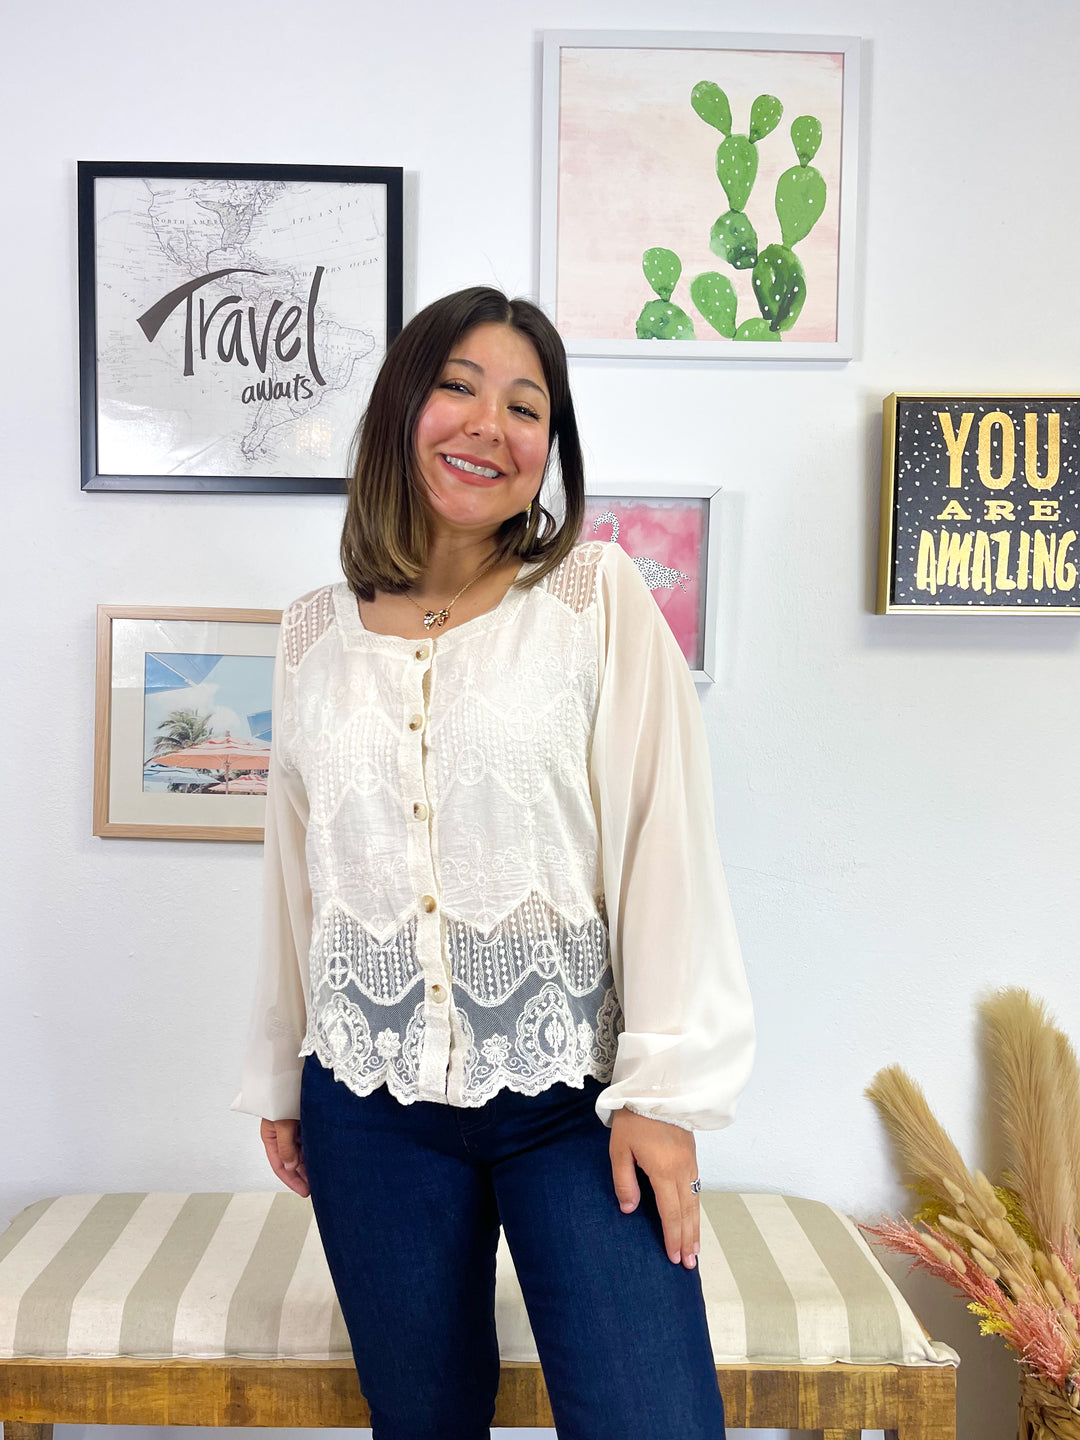 The Lacey Embroidered Blouse